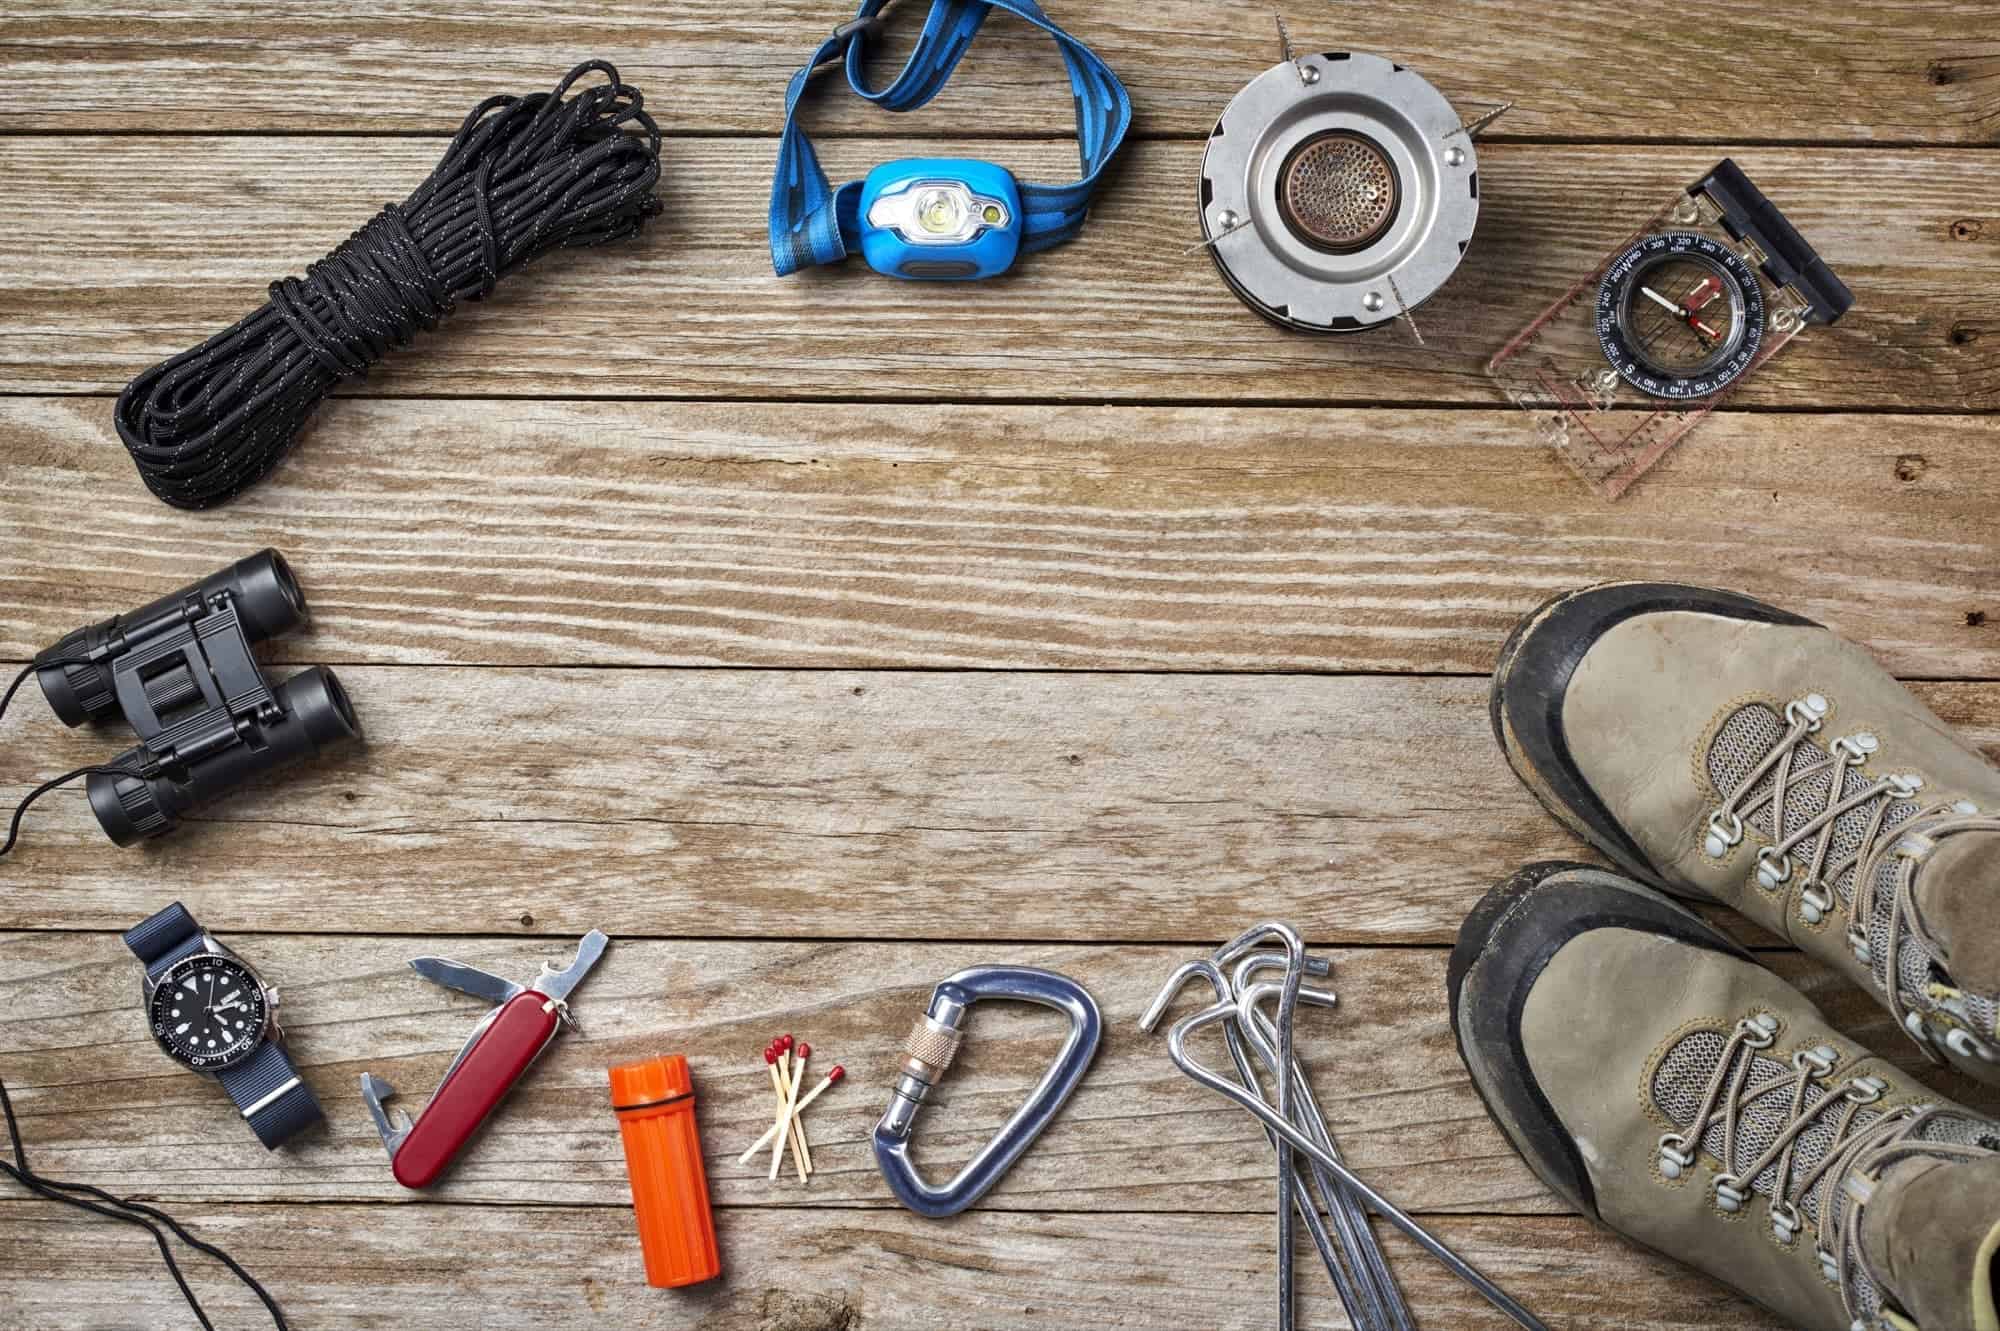 The necessary tools for climbing